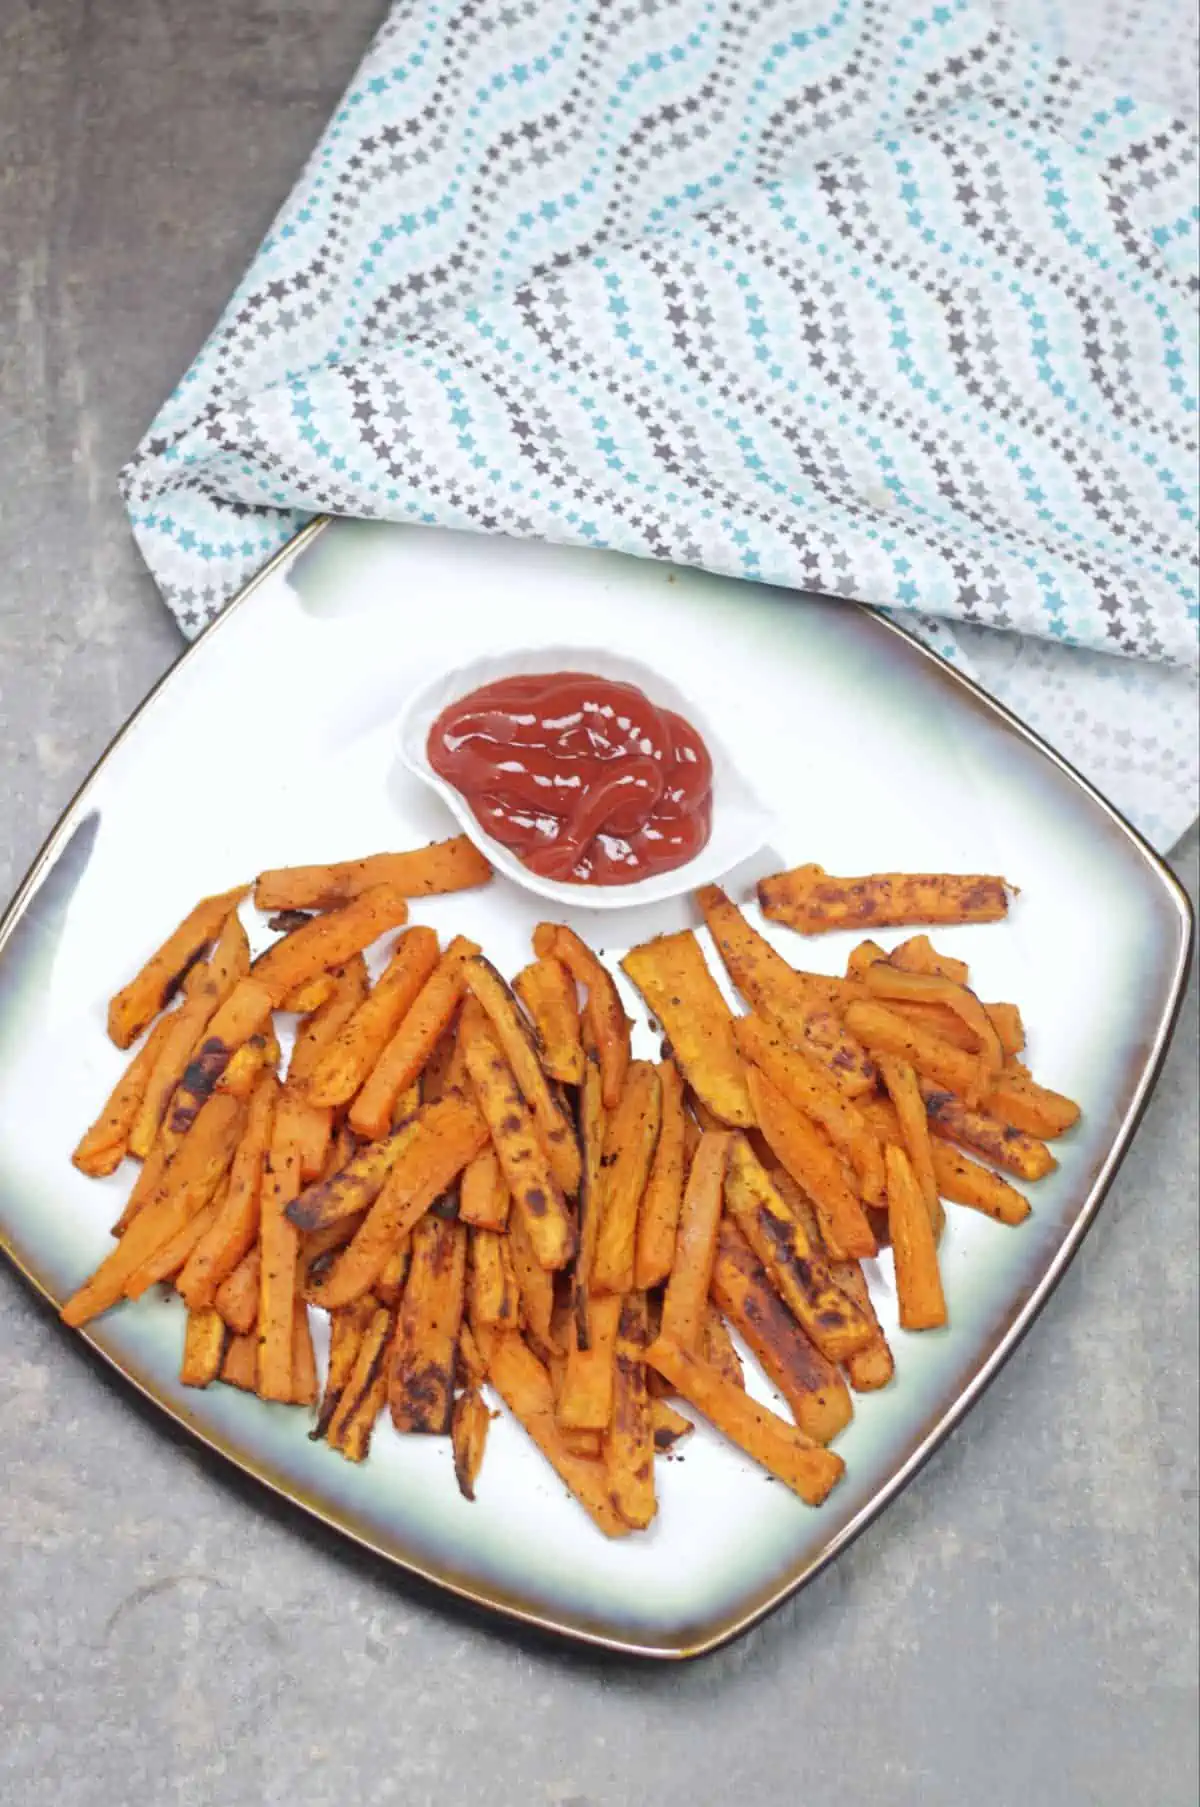 sweet potato fries in a plate with ketchup on side.